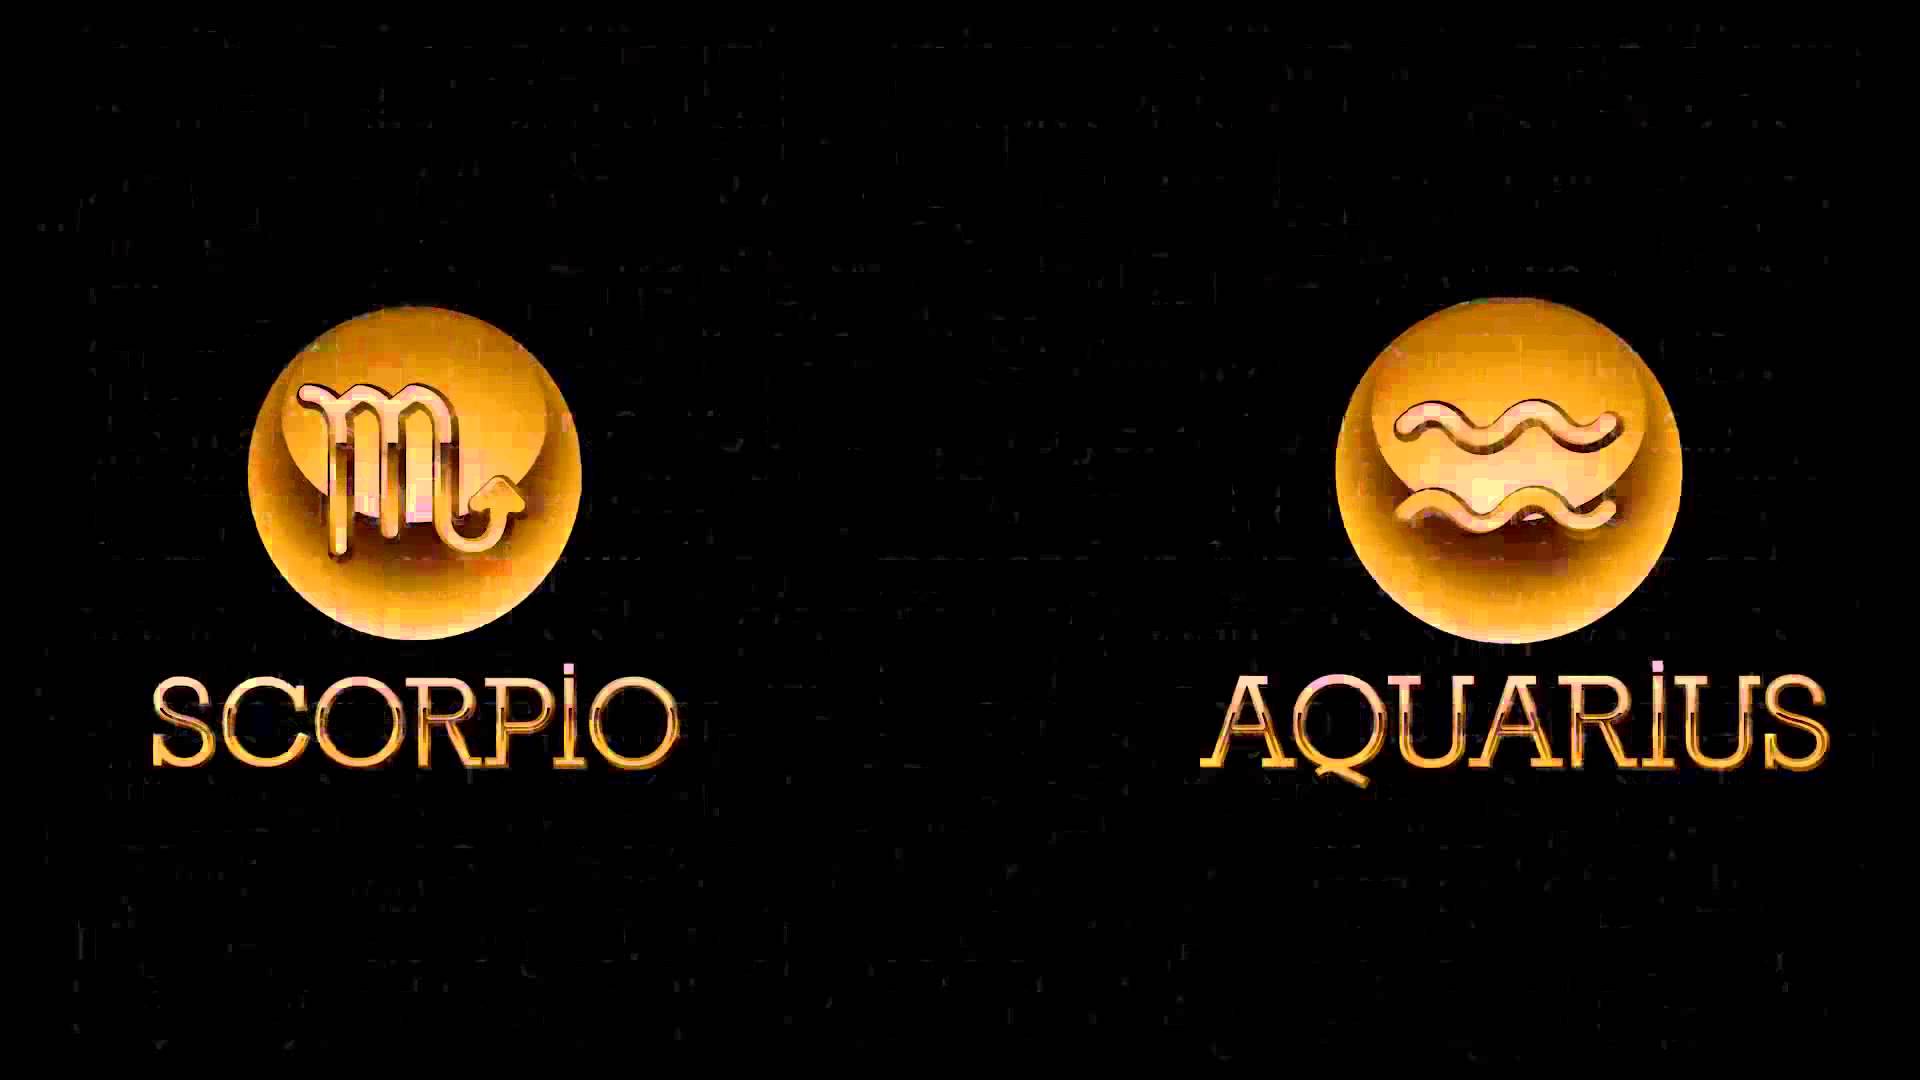 Zodiac Sign Says About Scorpio and Aquarius compatibility - YouTube